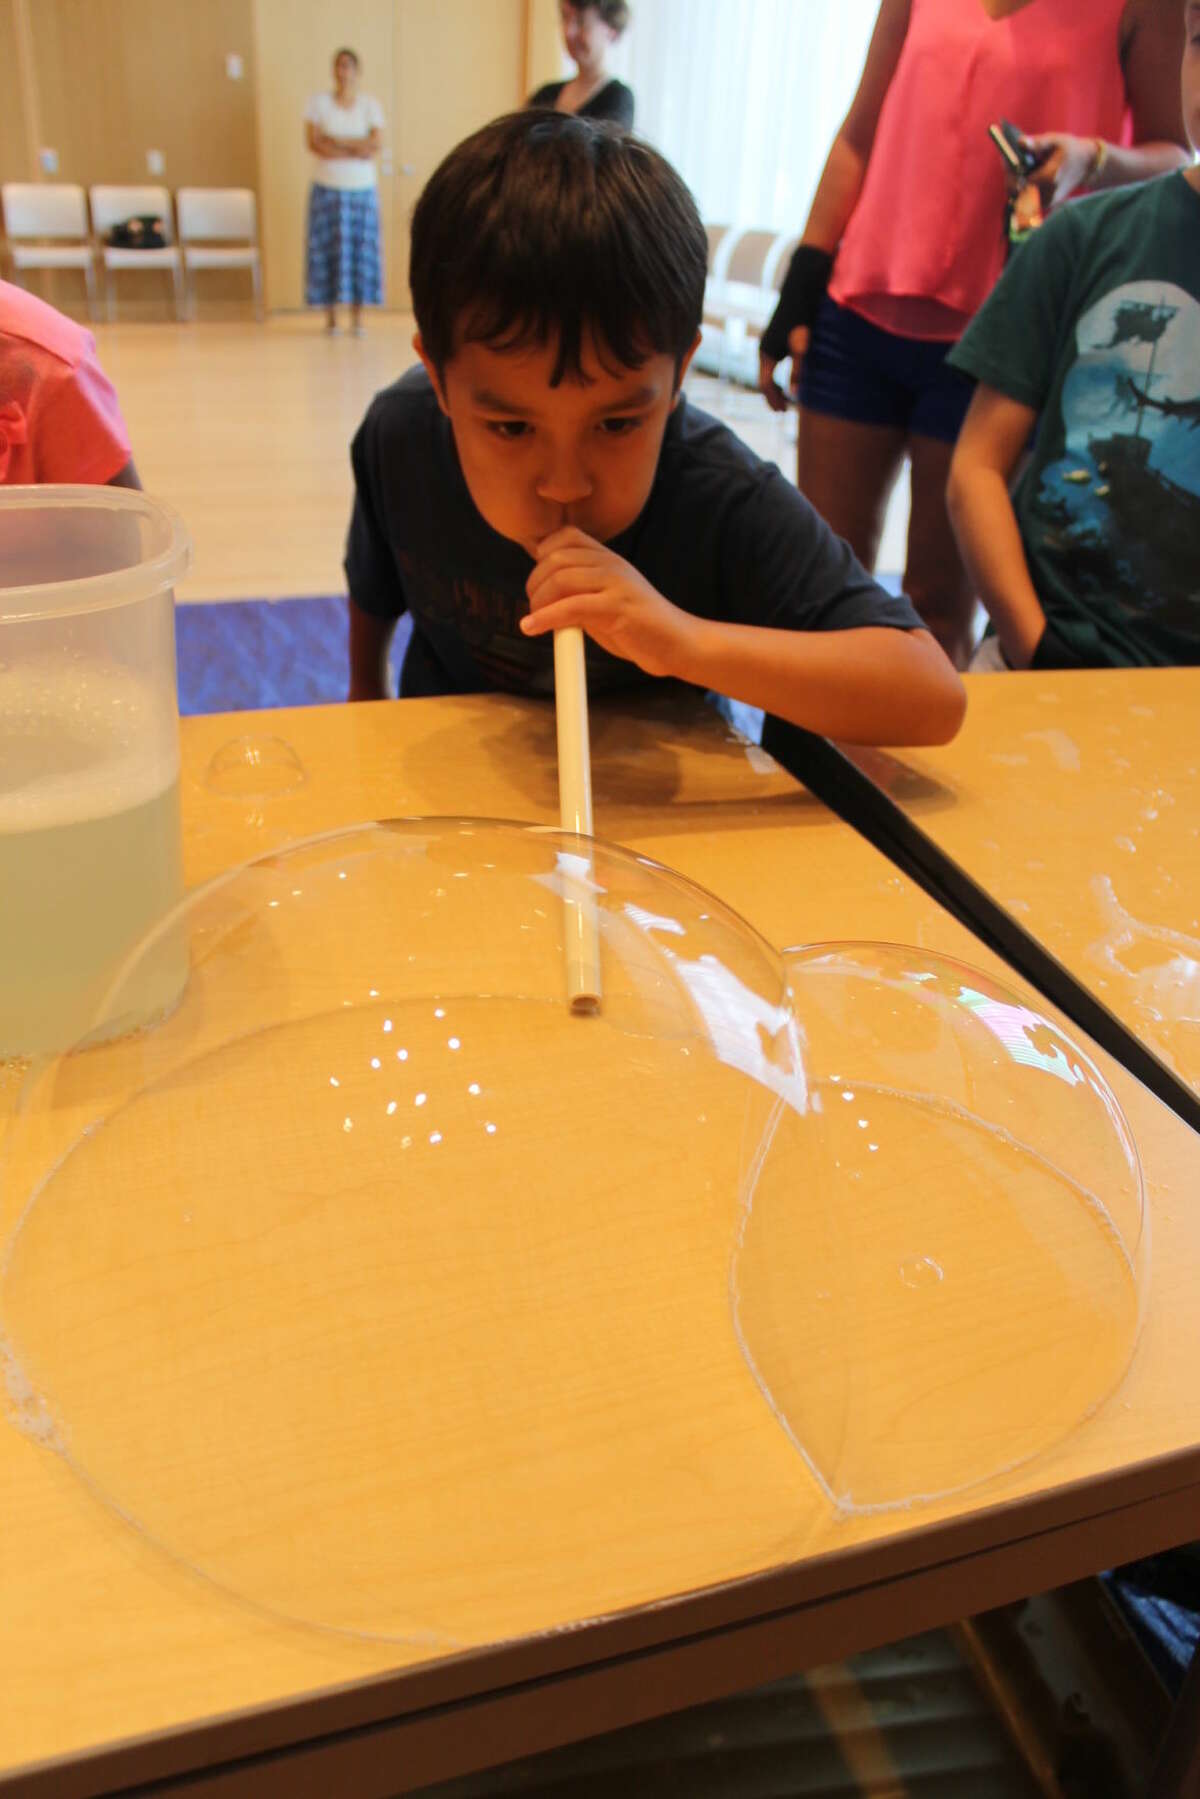 Daniel Lanaro finds some magic in Bubble Technology as he tries his skills at blowing bubbles.